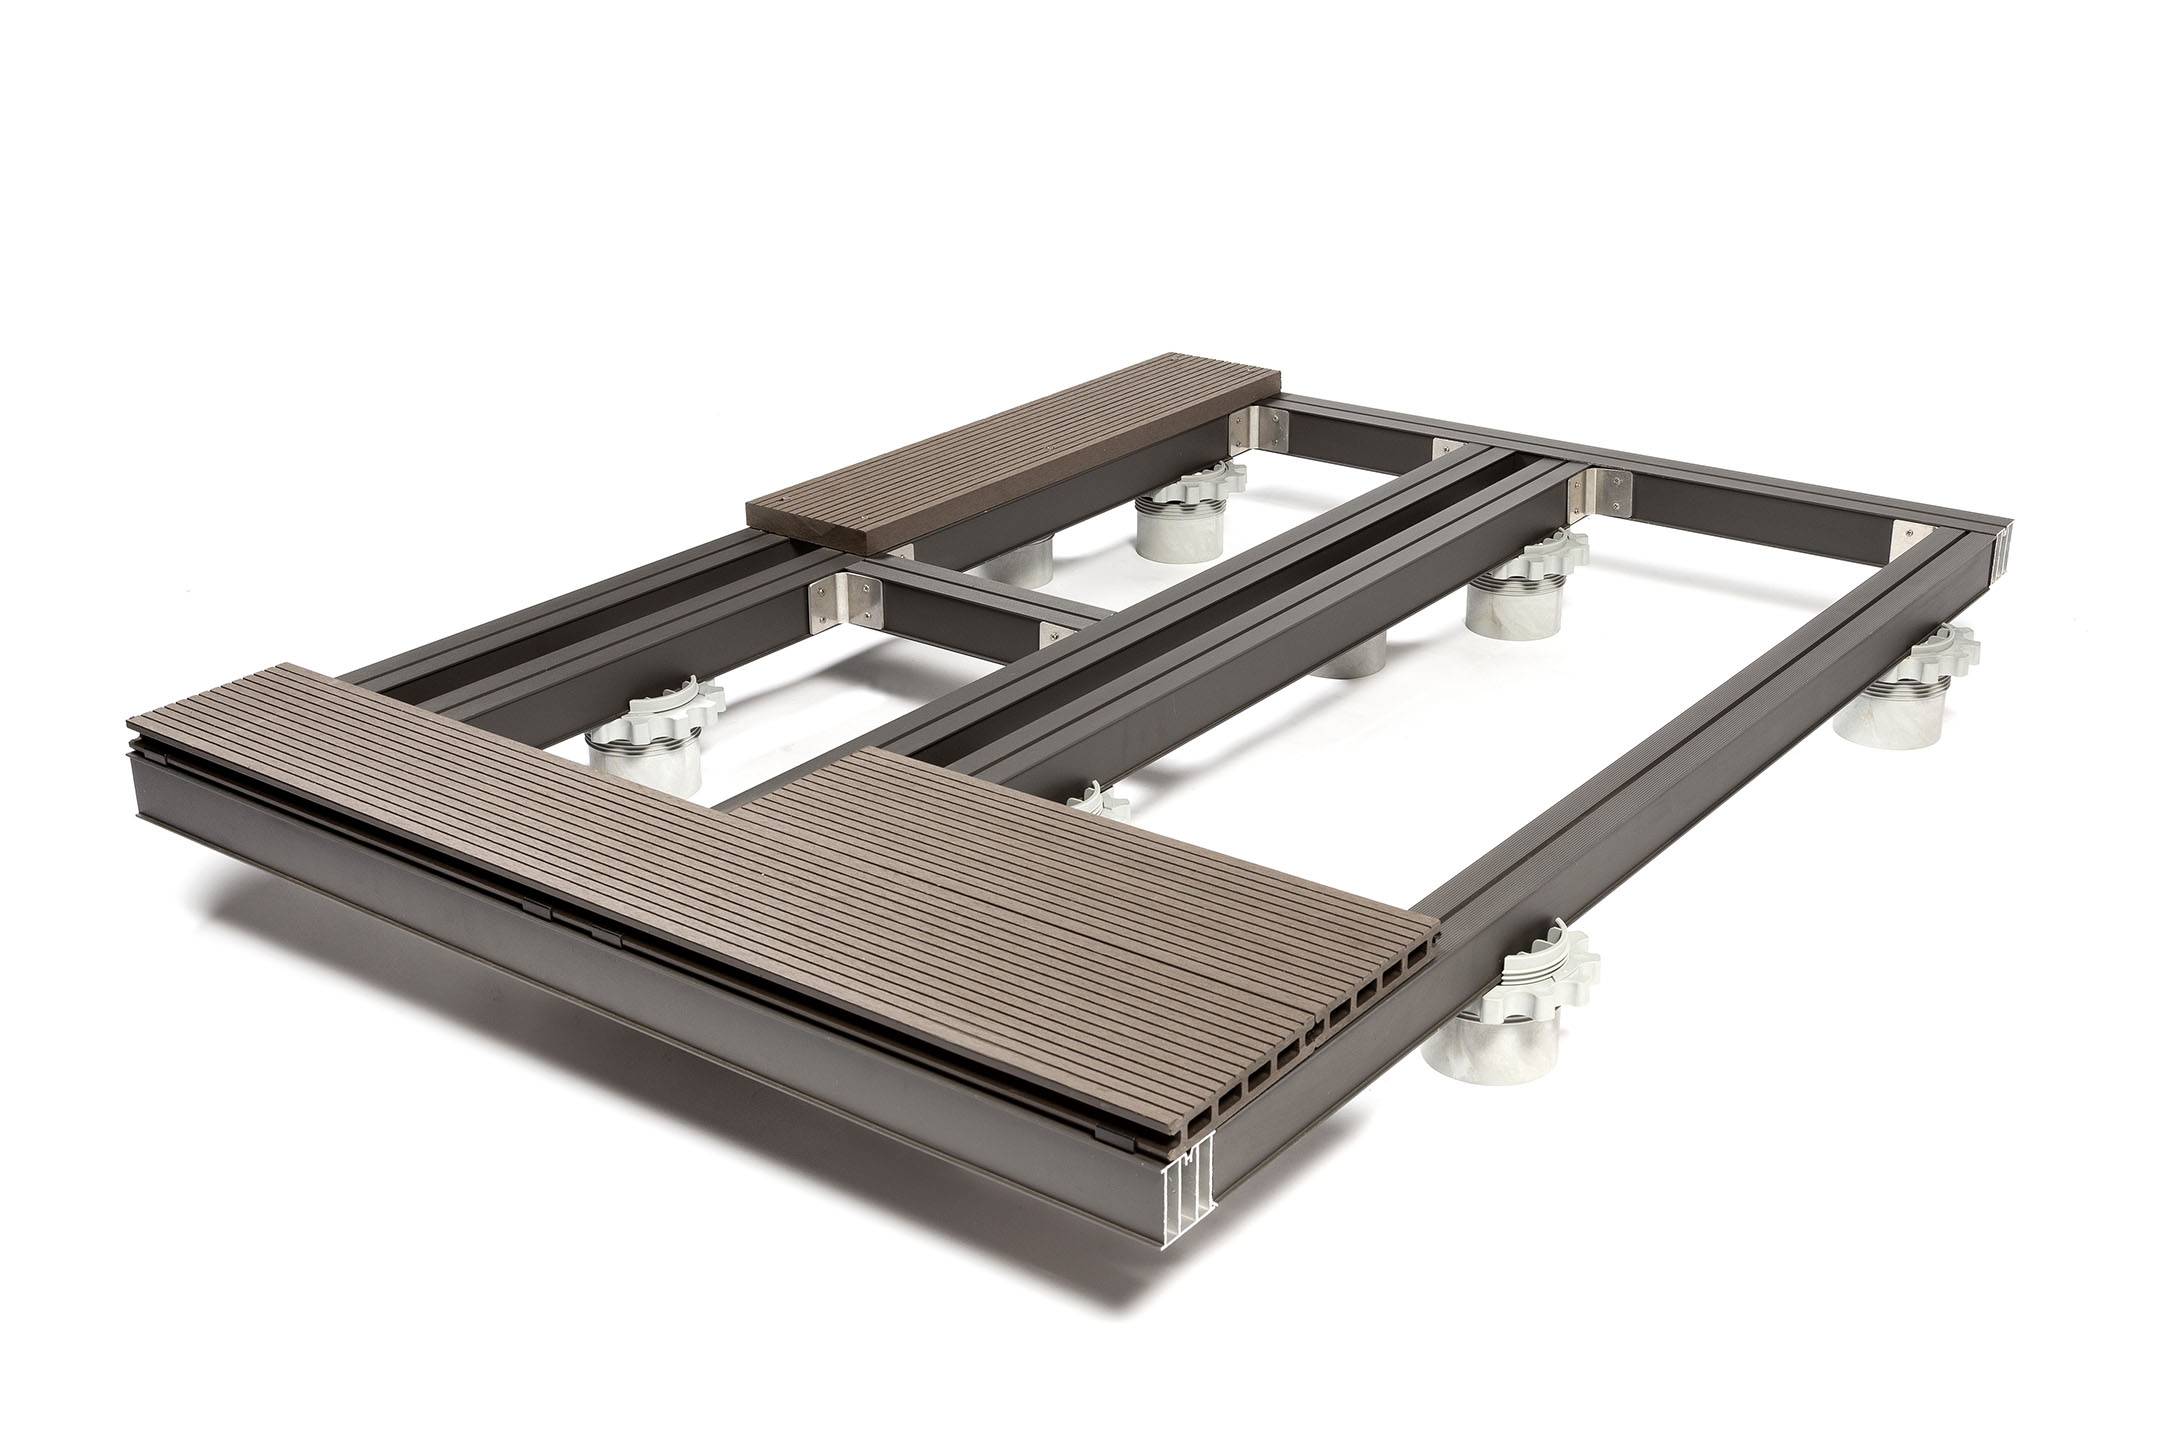 Class B Fire Resistant Subframe System - Joists and Pedestals